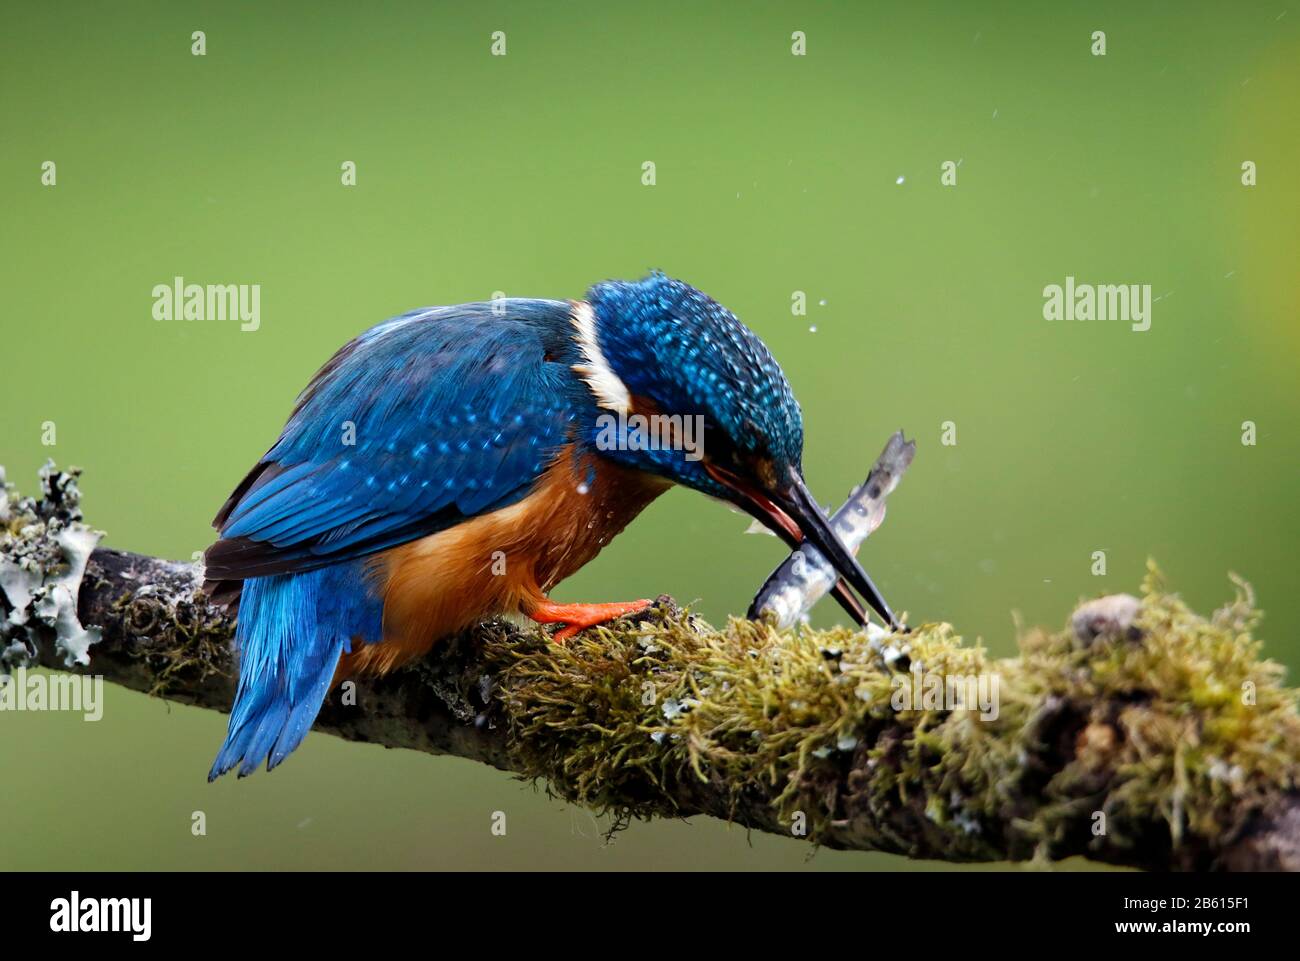 Male kingfisher fishing on a mossy branch Stock Photo